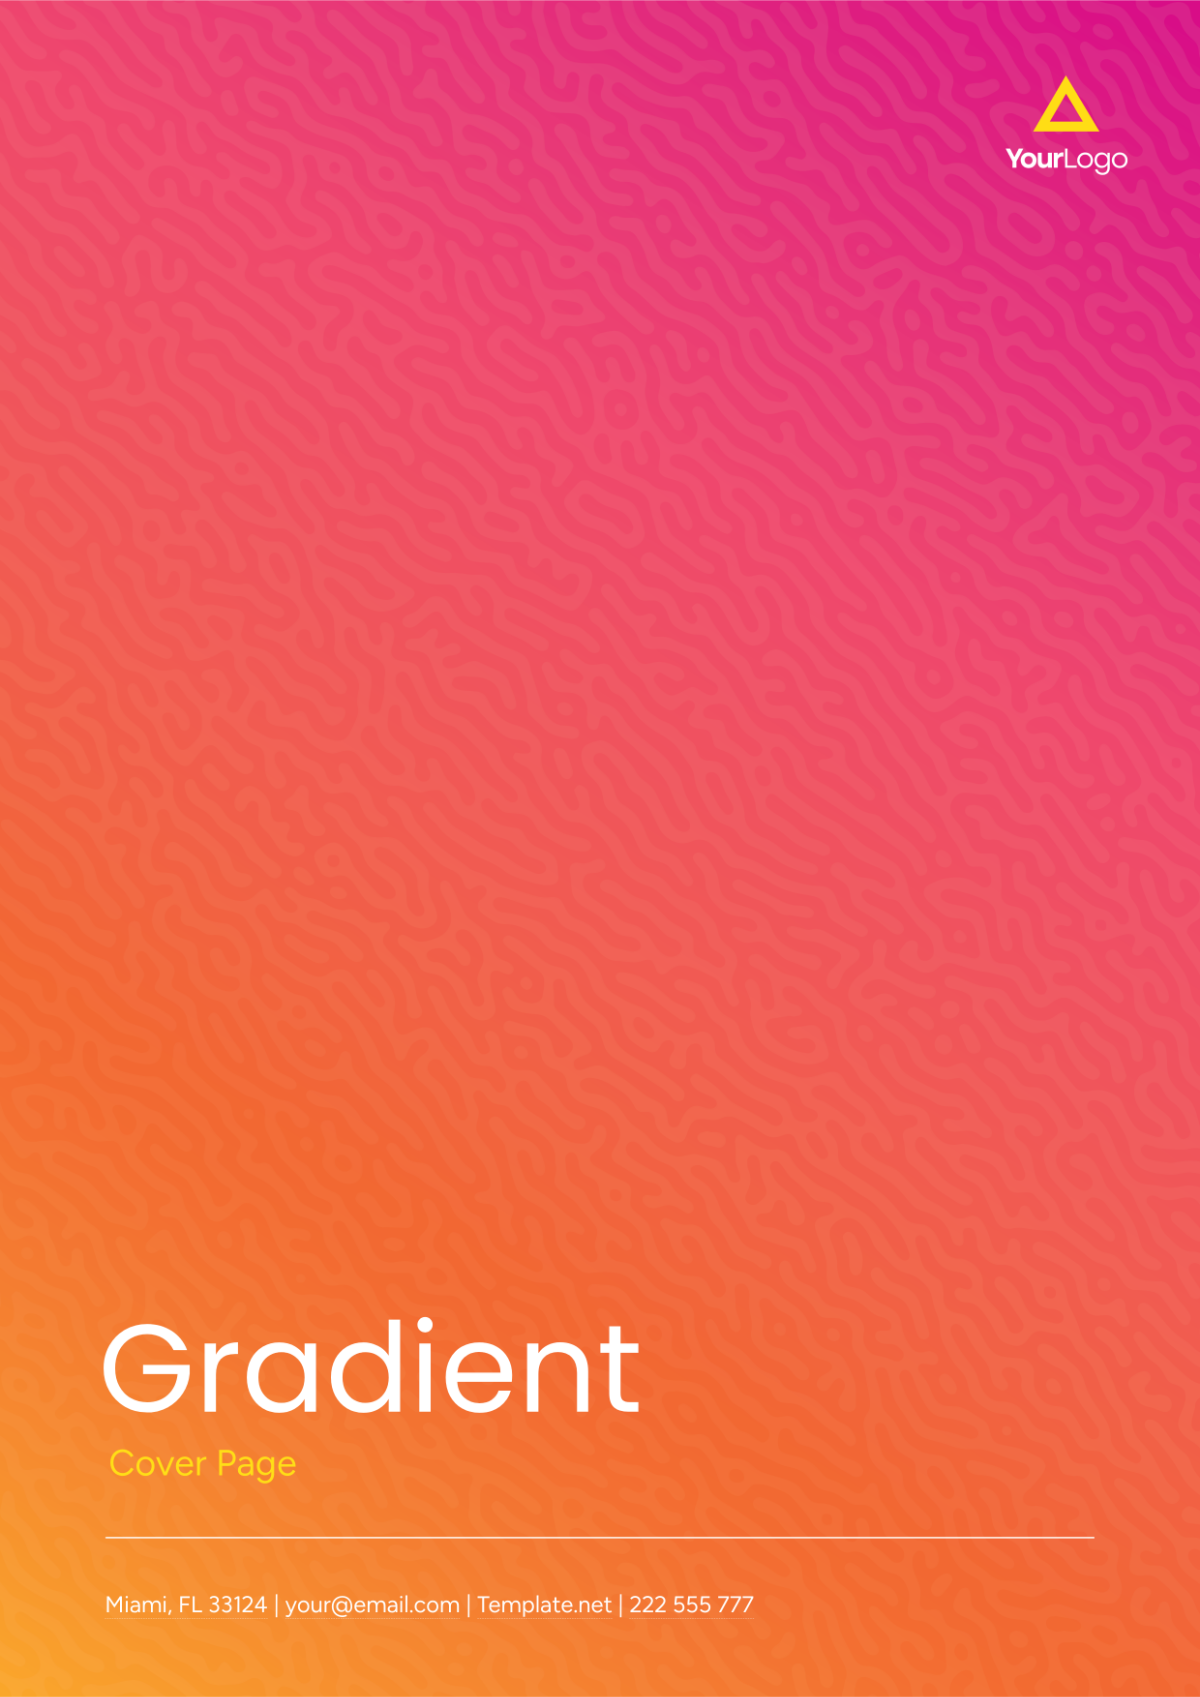 Free Gradient Heading Cover Page Template